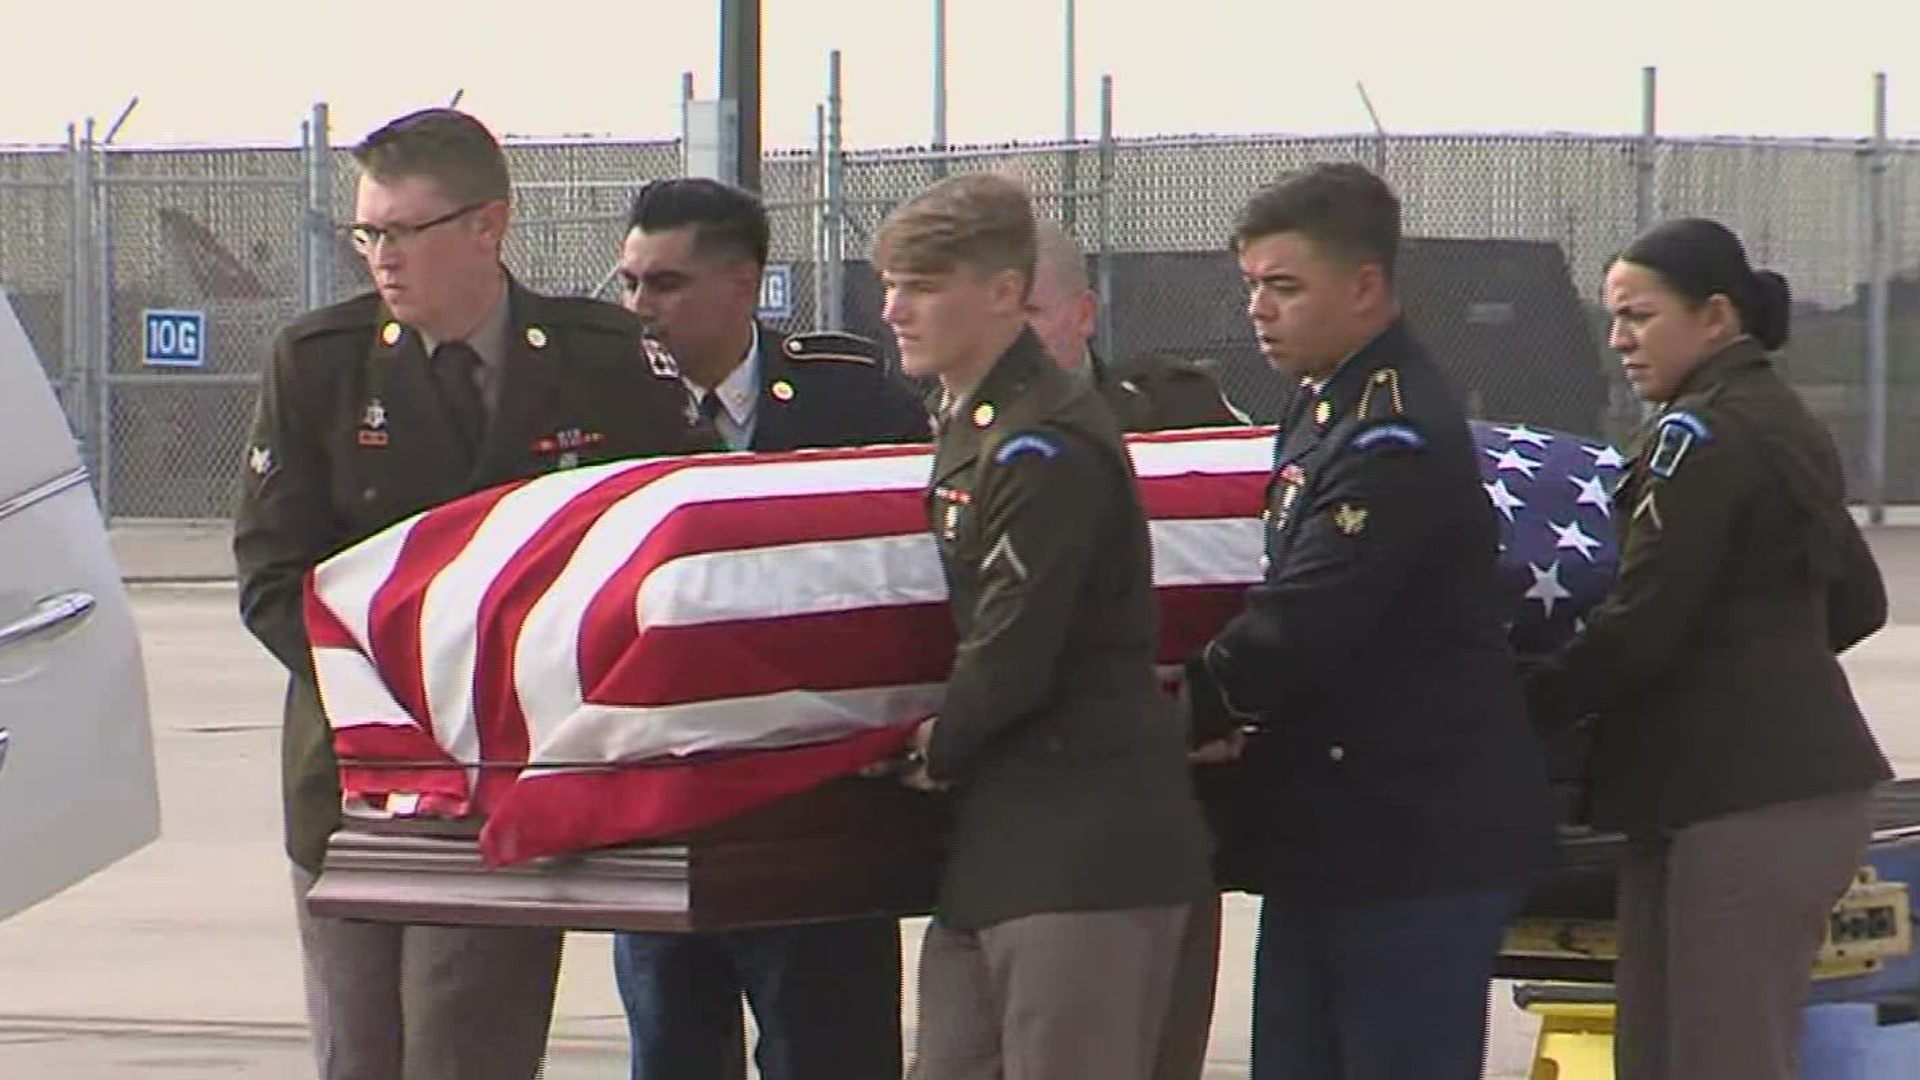 San Patricio County native Sgt. Herald R. Boyd, 25, was killed in 1945 during World War II. His remains were finally identified this summer and he is now home.